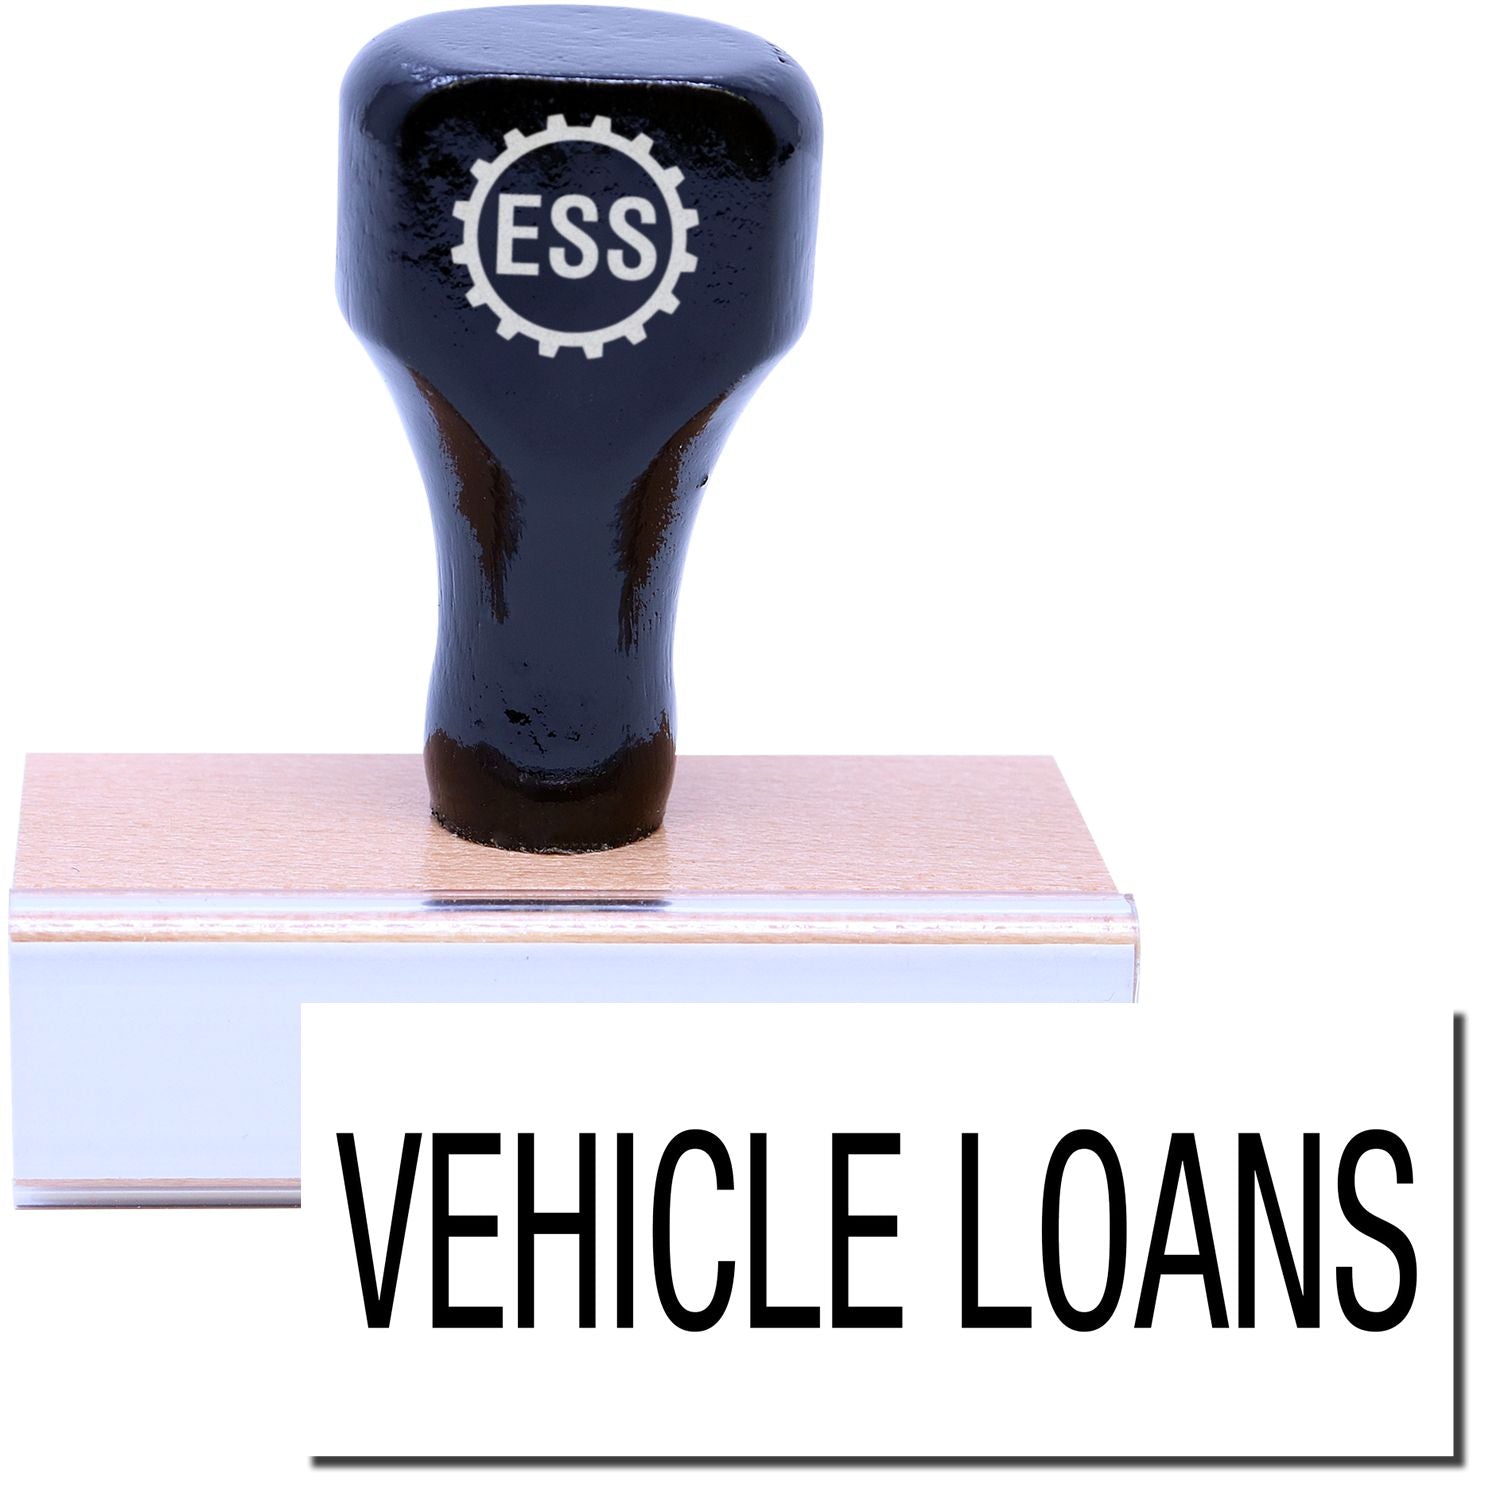 A stock office rubber stamp with a stamped image showing how the text "VEHICLE LOANS" in a large font is displayed after stamping.